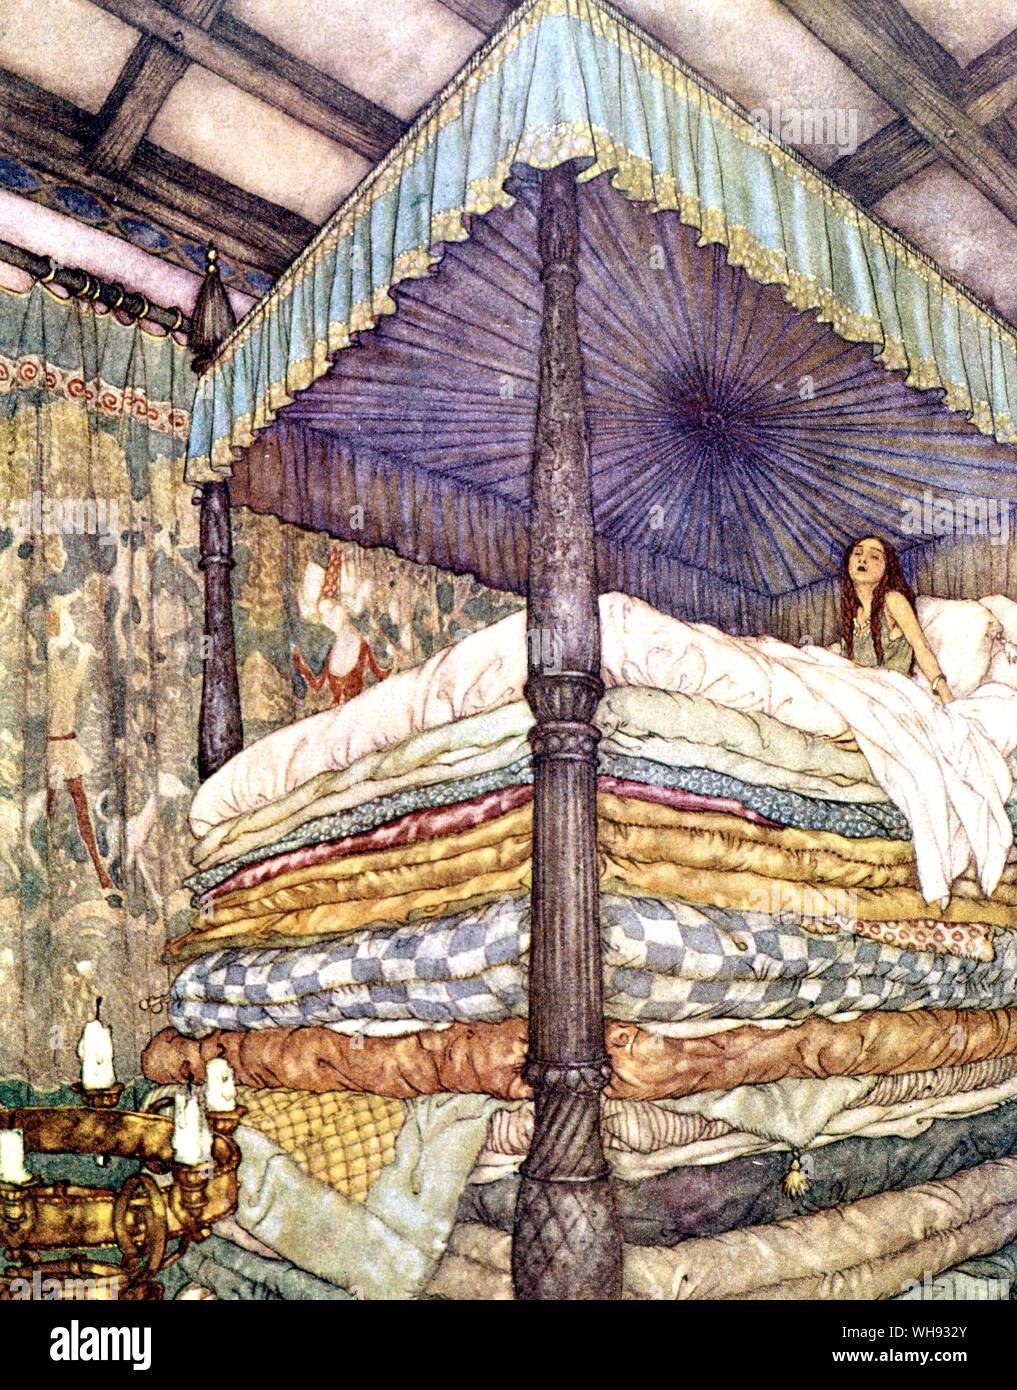 The Princess and the Pea. The princess after her uncomfortable night illustrated by Edmund Dulac, 1911.. Stock Photo